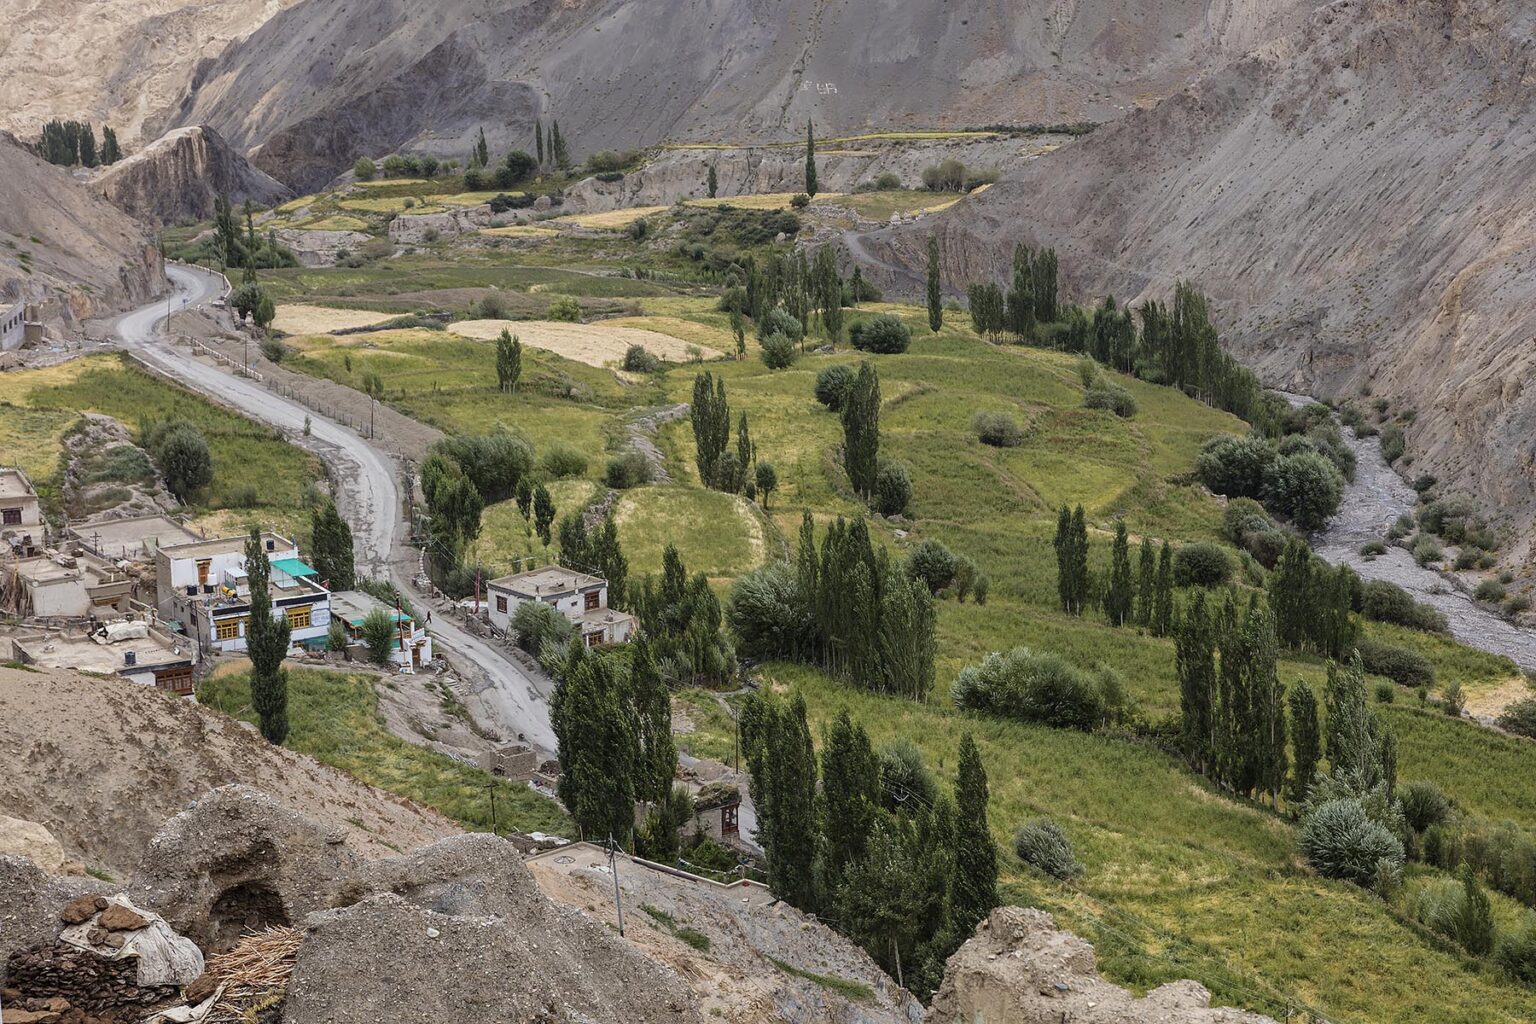 The fertile valley below LAMAYURU MONASTERY founded by NAROPA has provided food for local people for many centuries - LADAKH, INDIA